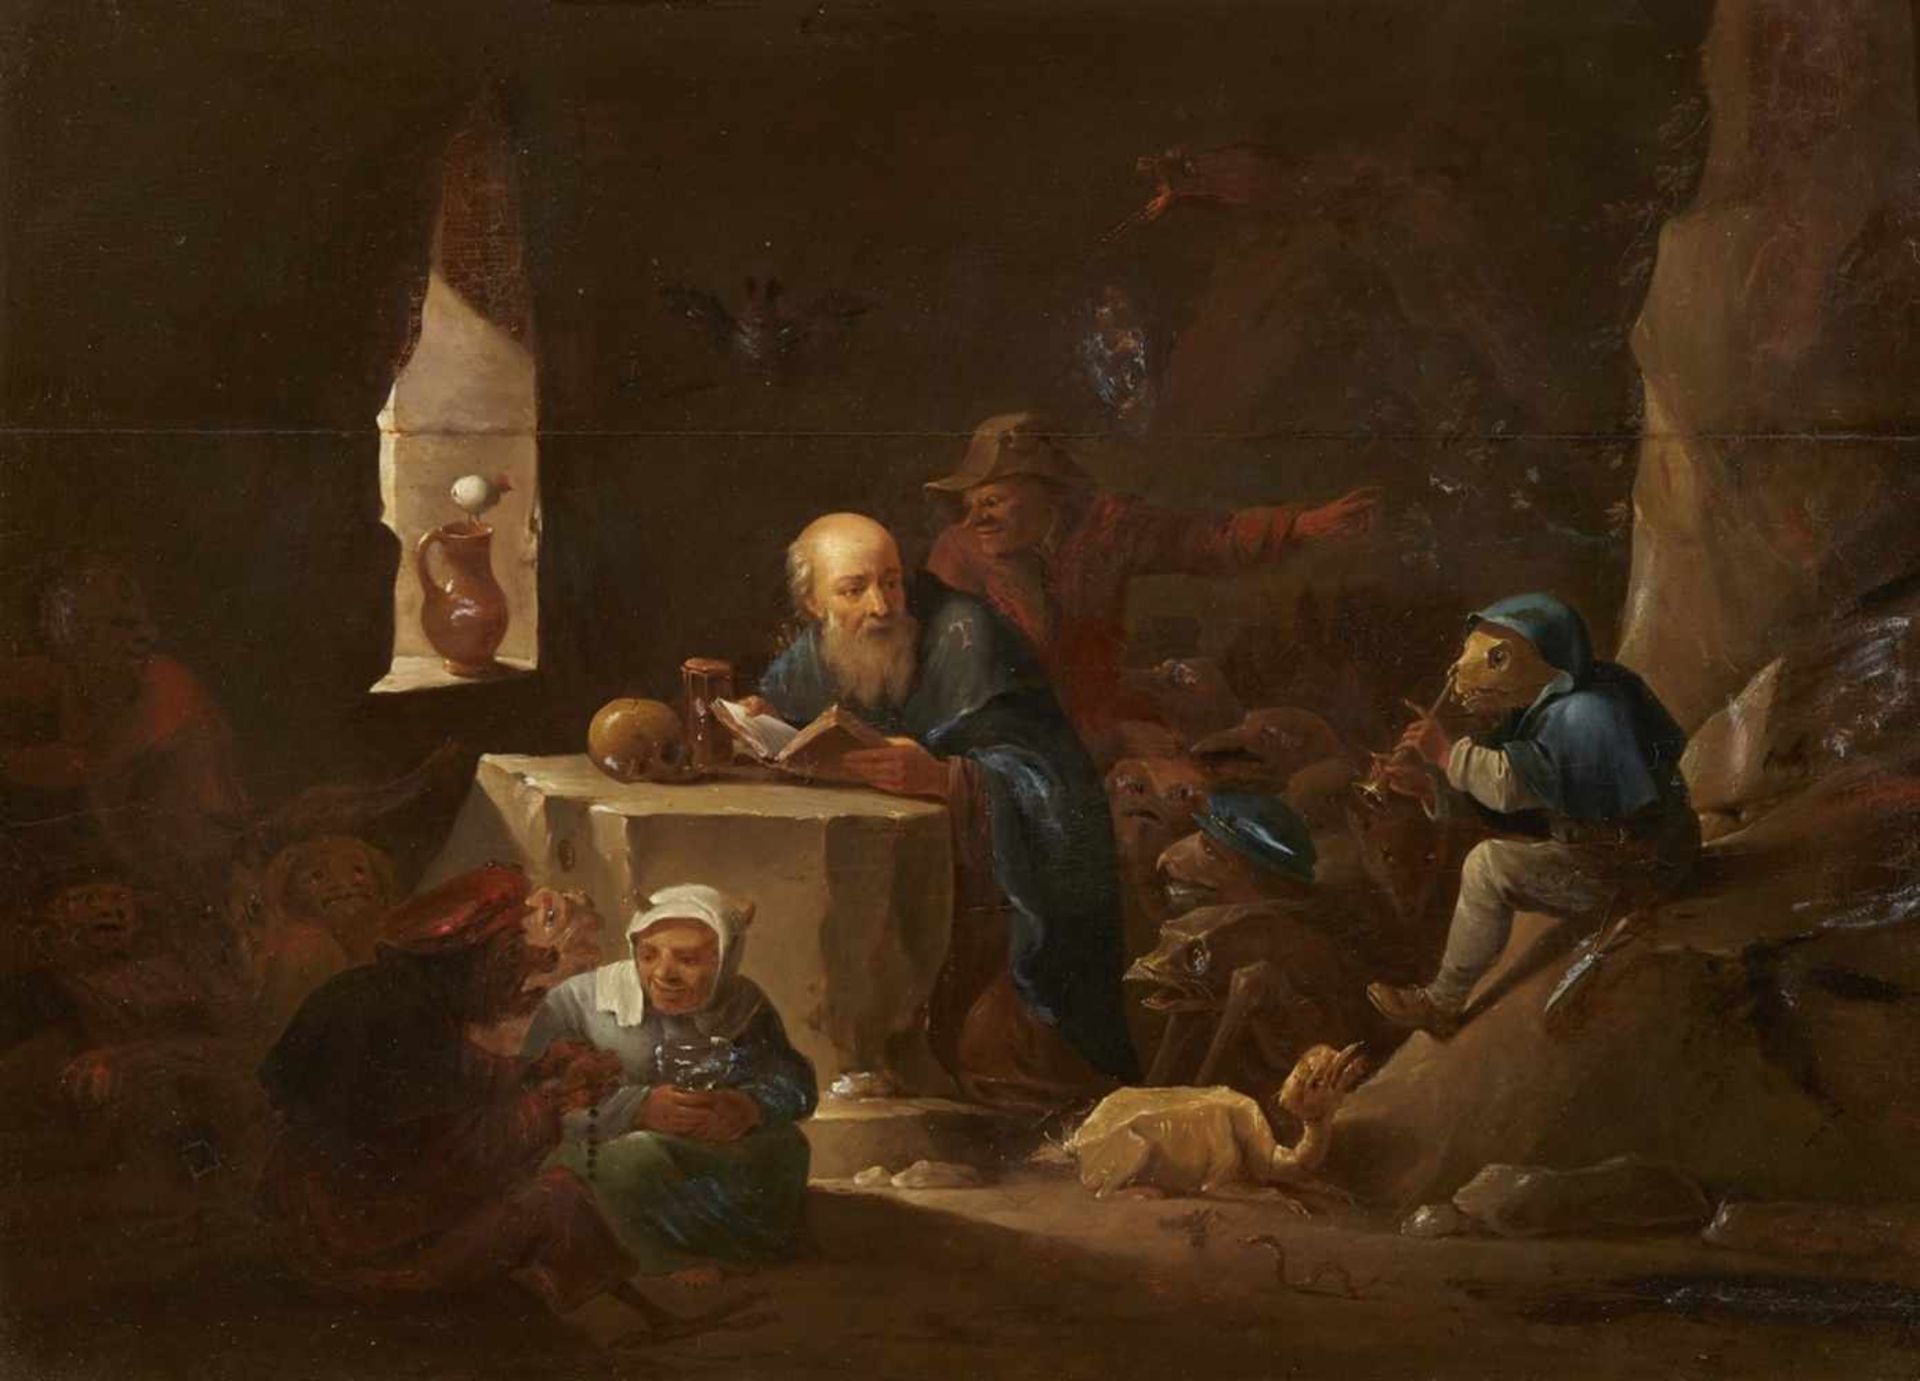 David Teniers the Younger, copy afterThe Temptation of Saint Anthony